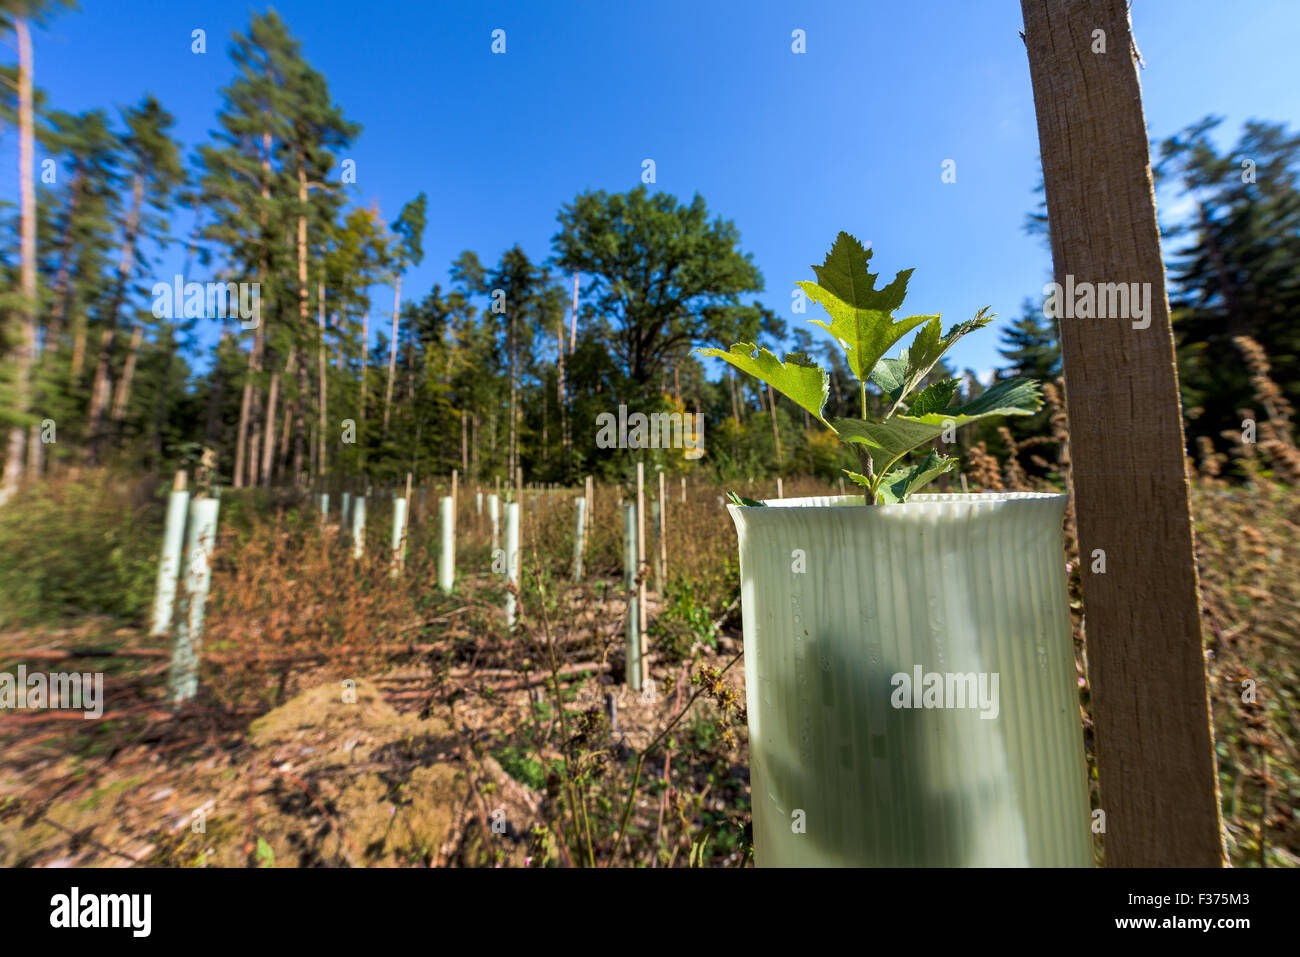 reforestation small saplings tube sapling tree forest protection from wild game bite, renew seedlings protection bruise, Conifer Stock Photo